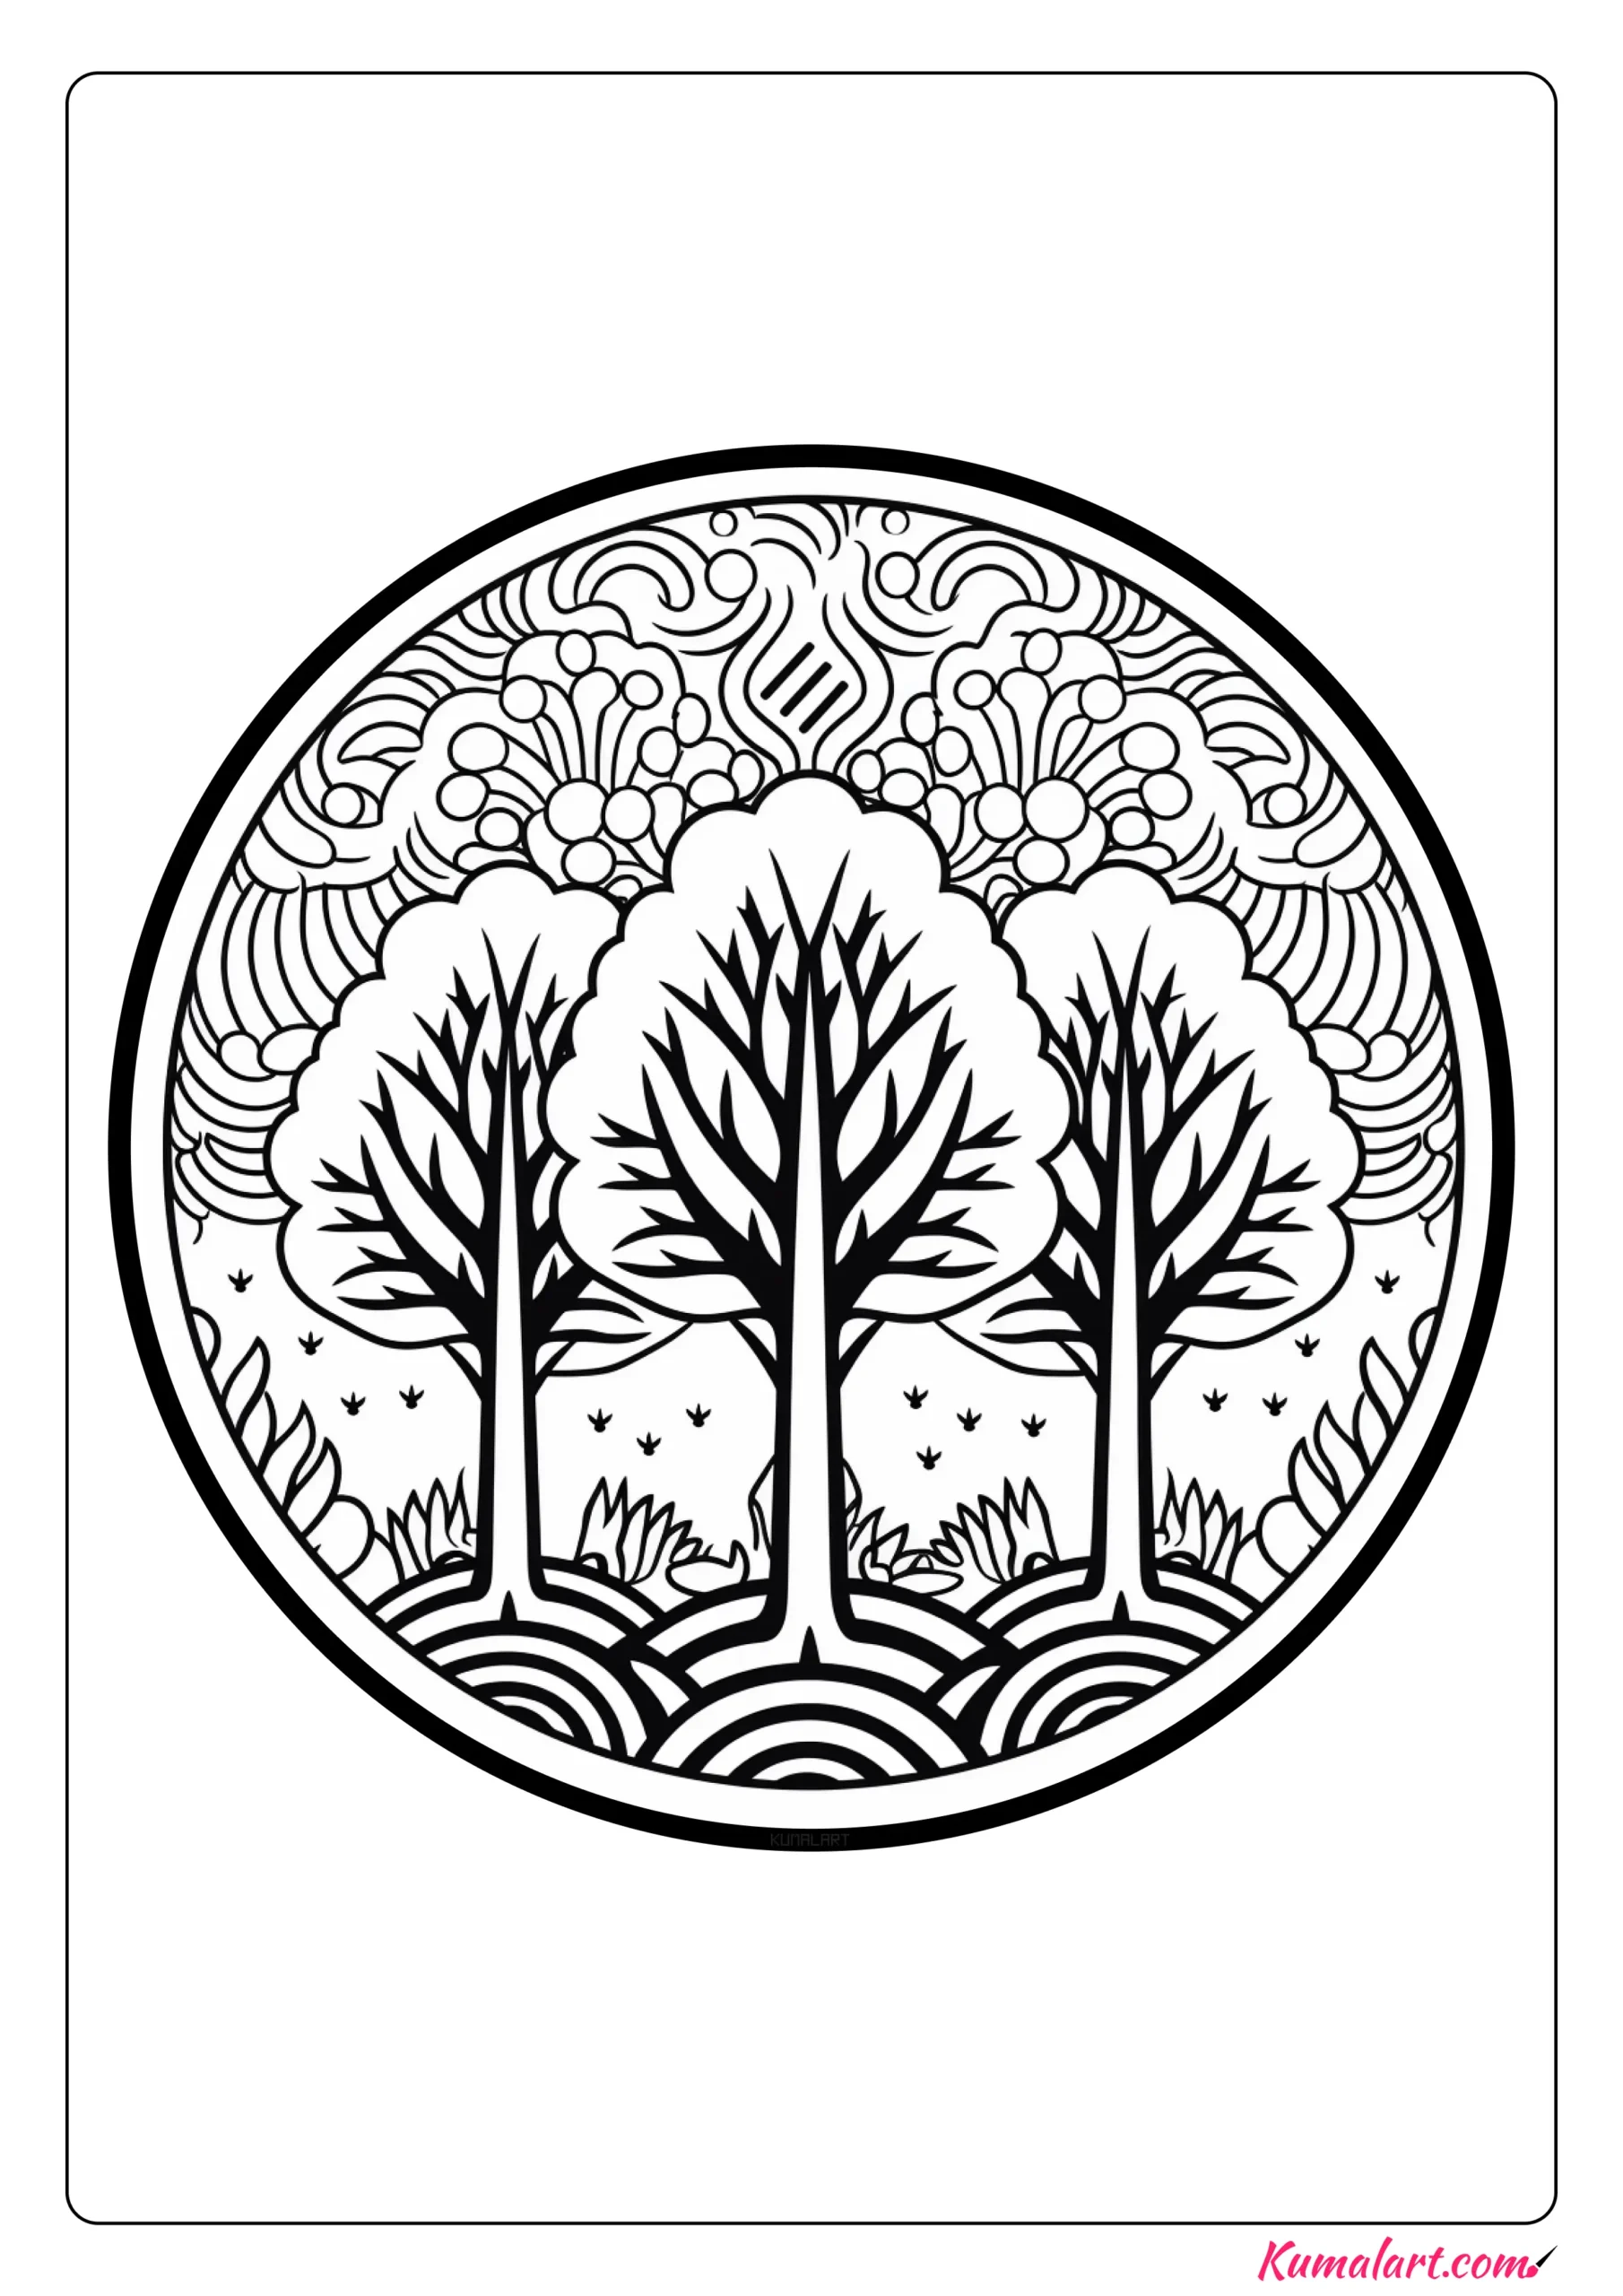 Dense Forest Coloring Page